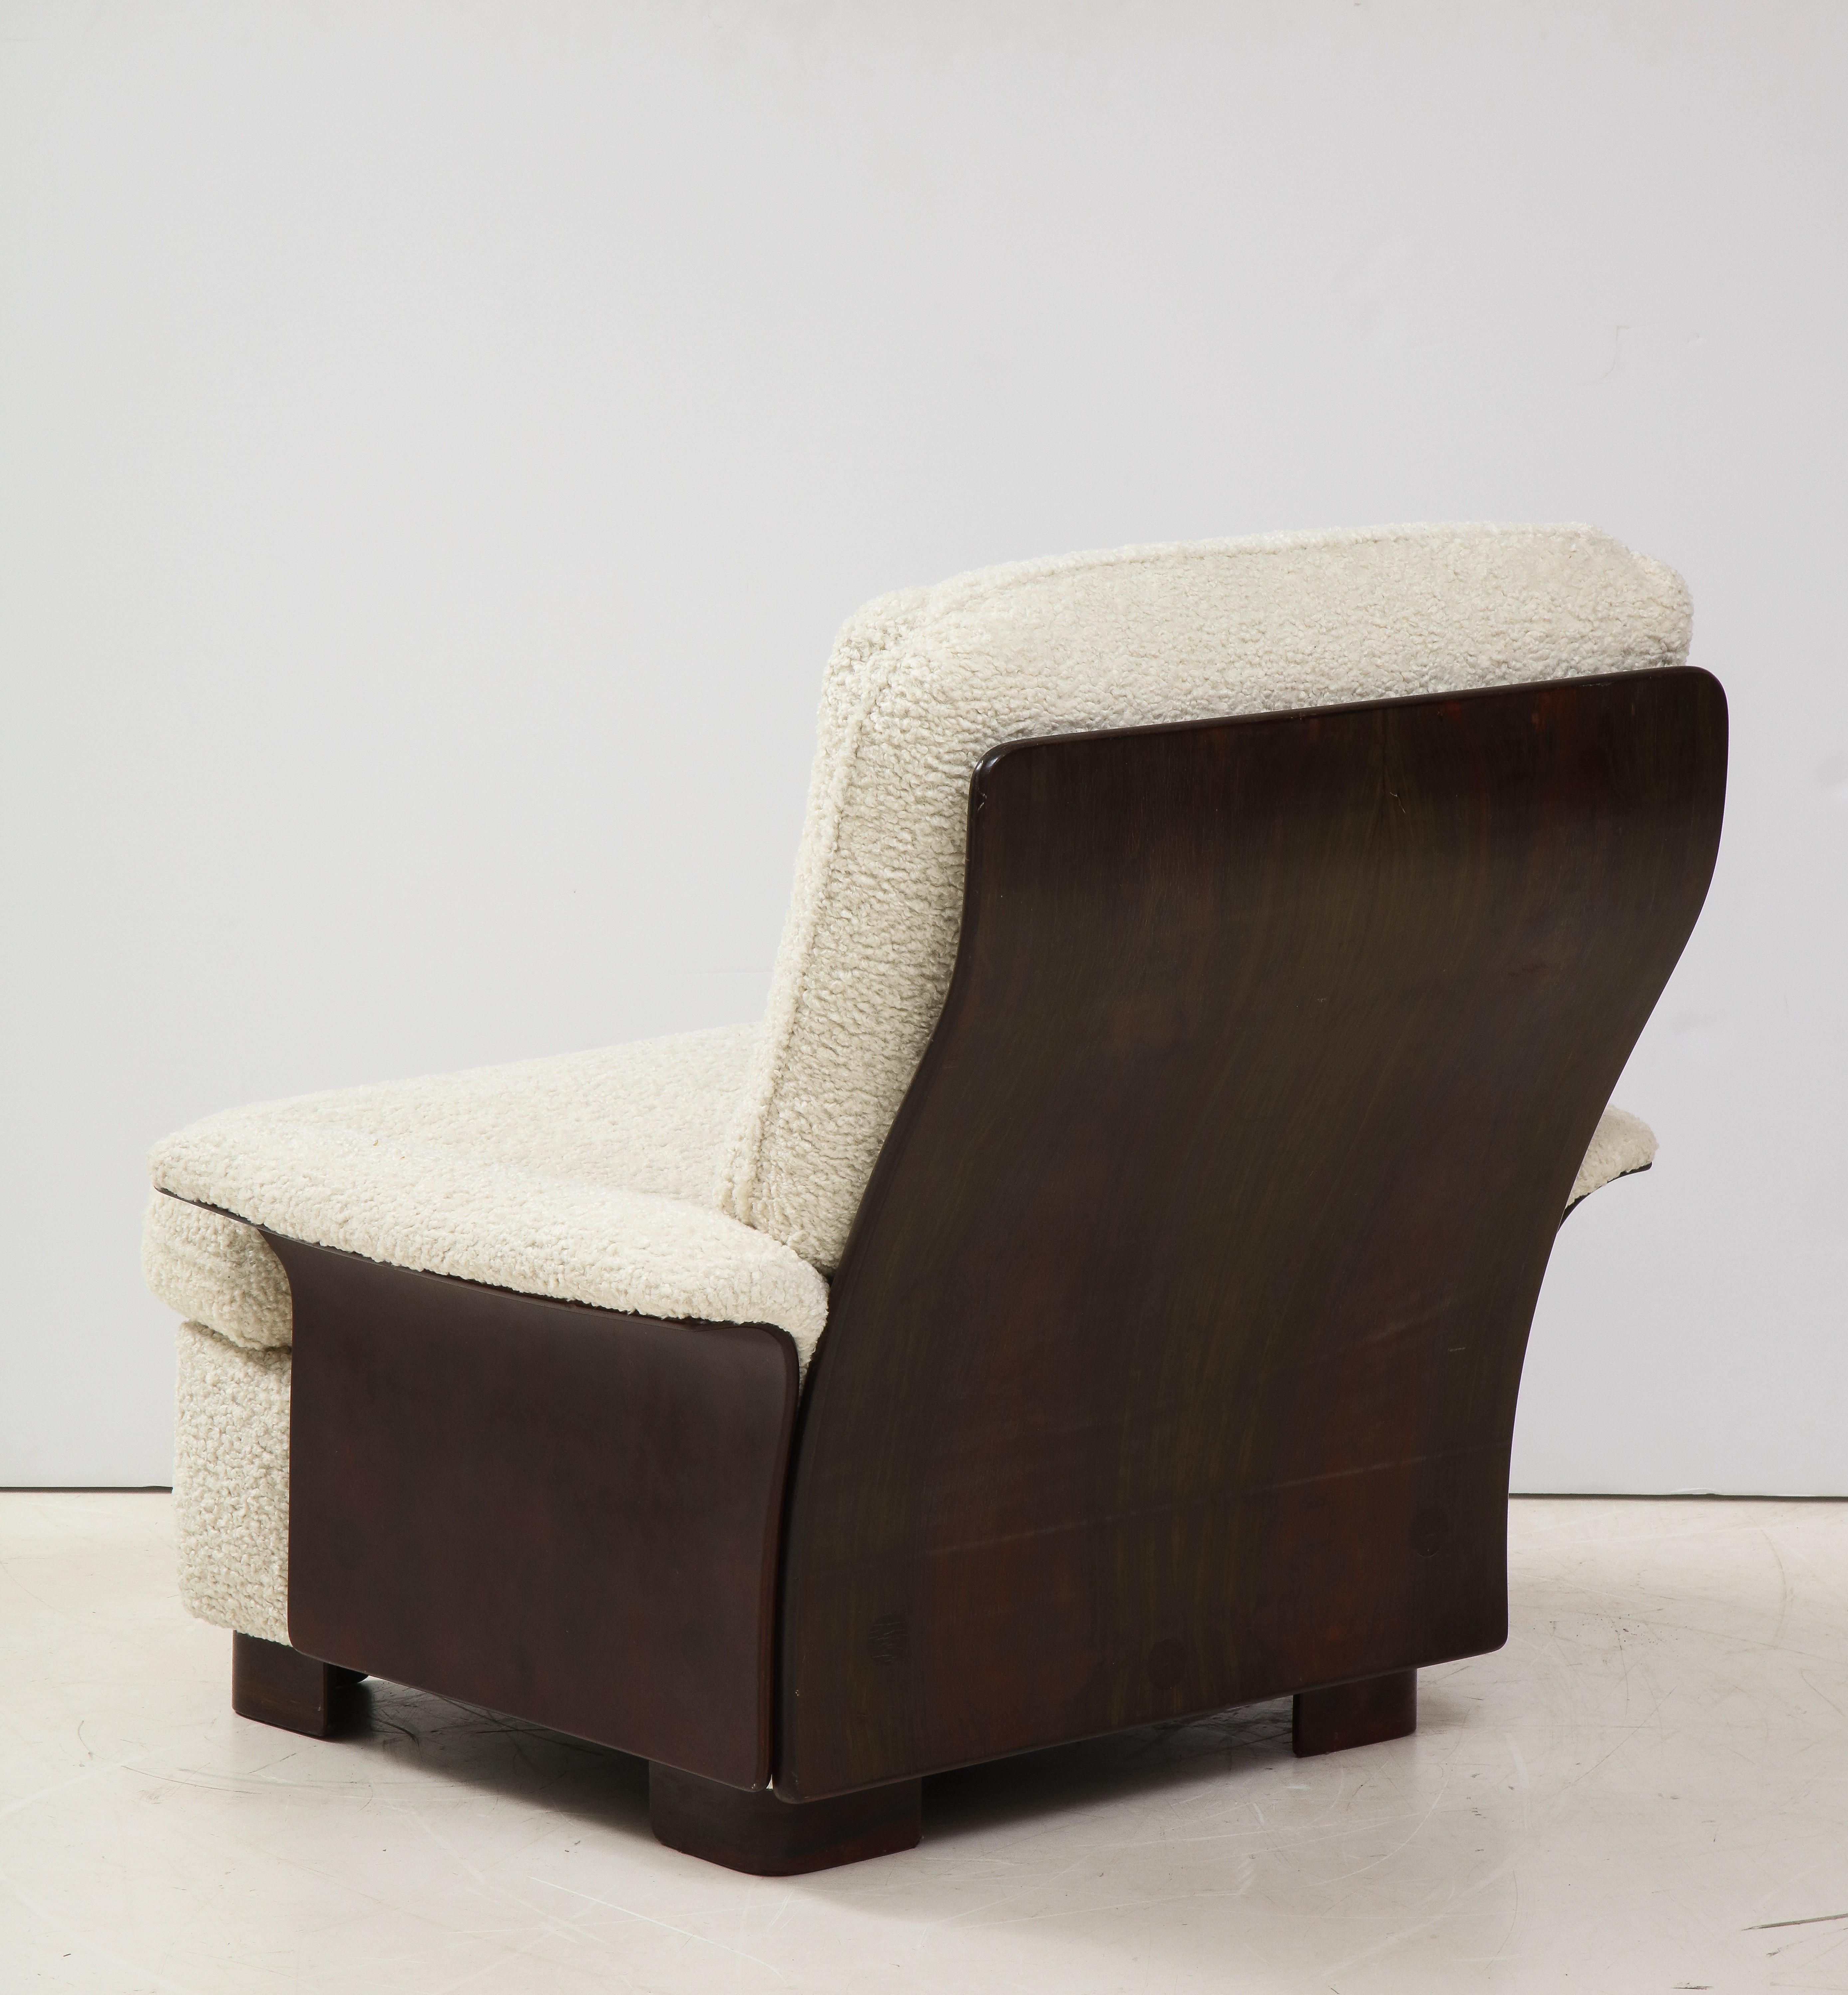 Upholstery Pair of Rare Italian Lounge Chairs by Gianfranco Frattini for Cassina